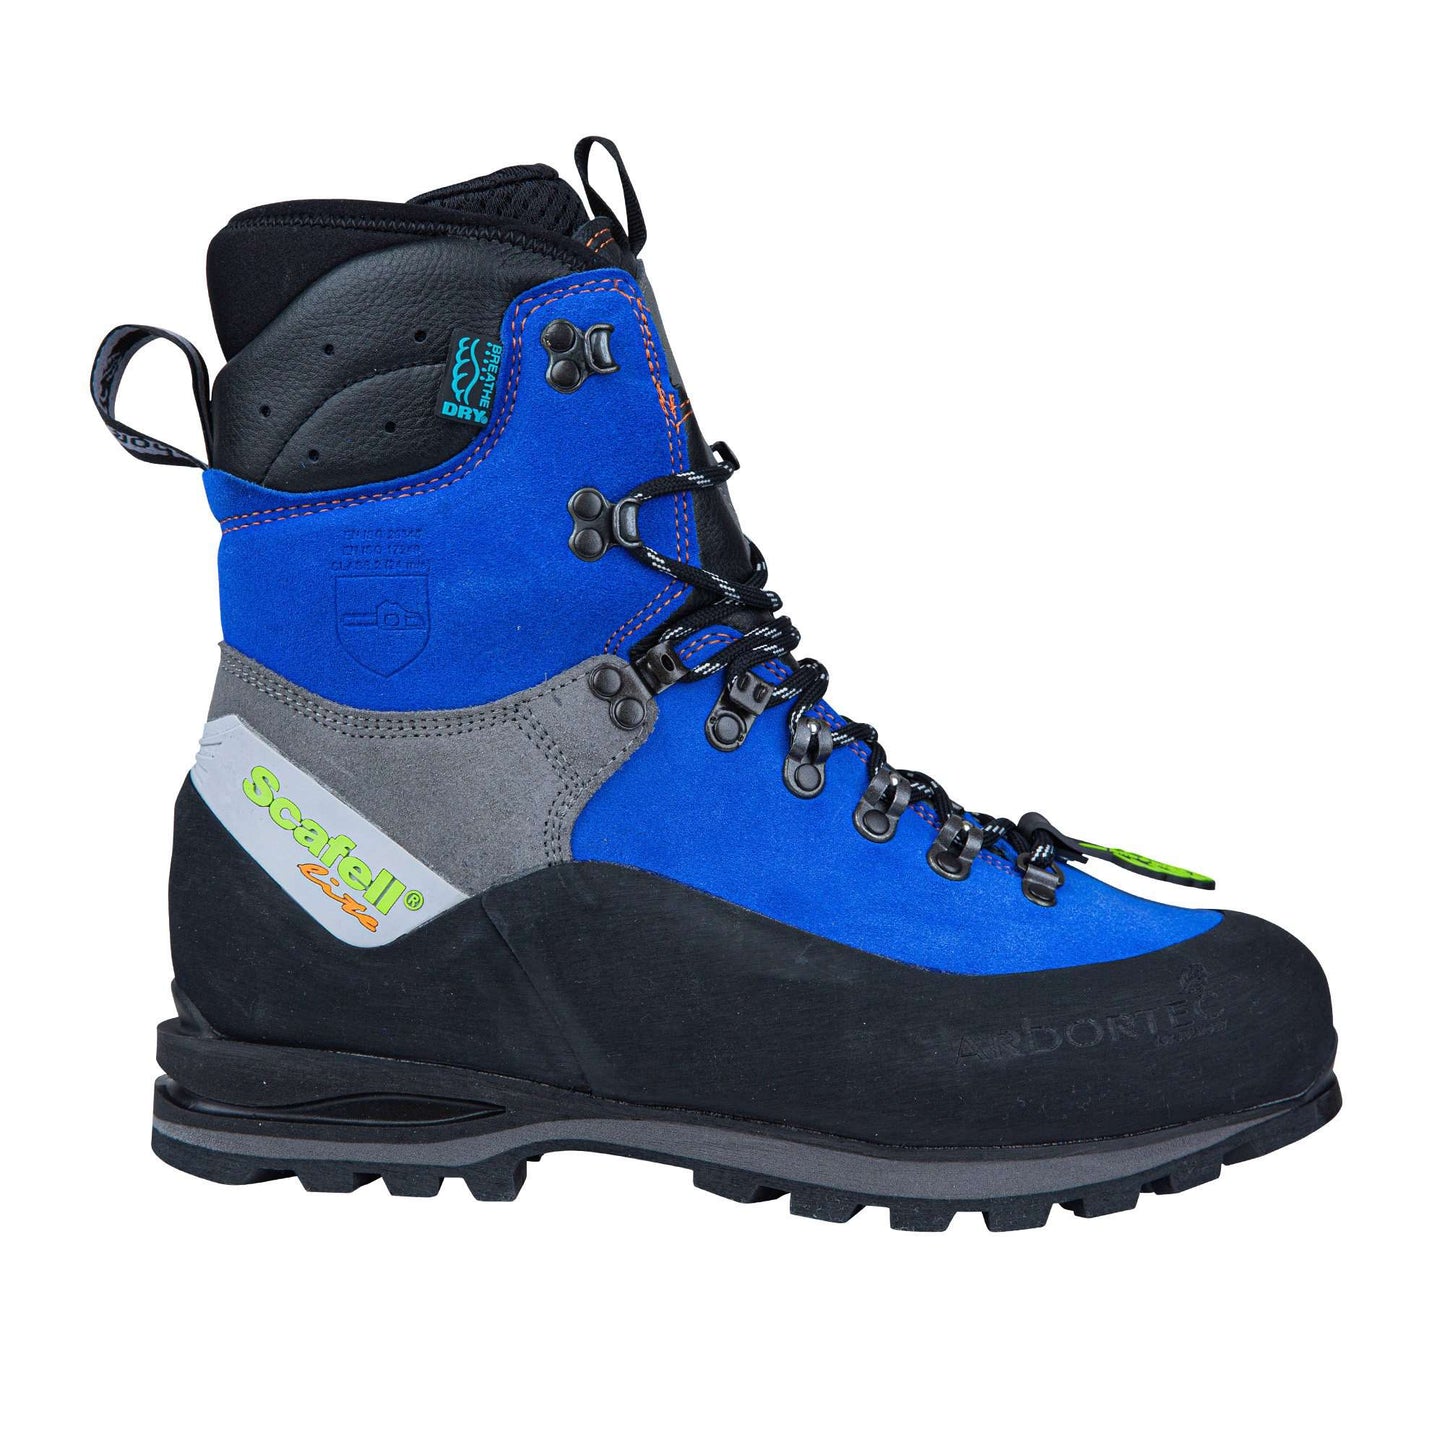 Arbortec AT33100 Scafell Lite Class 2 Chainsaw Boot - Blue